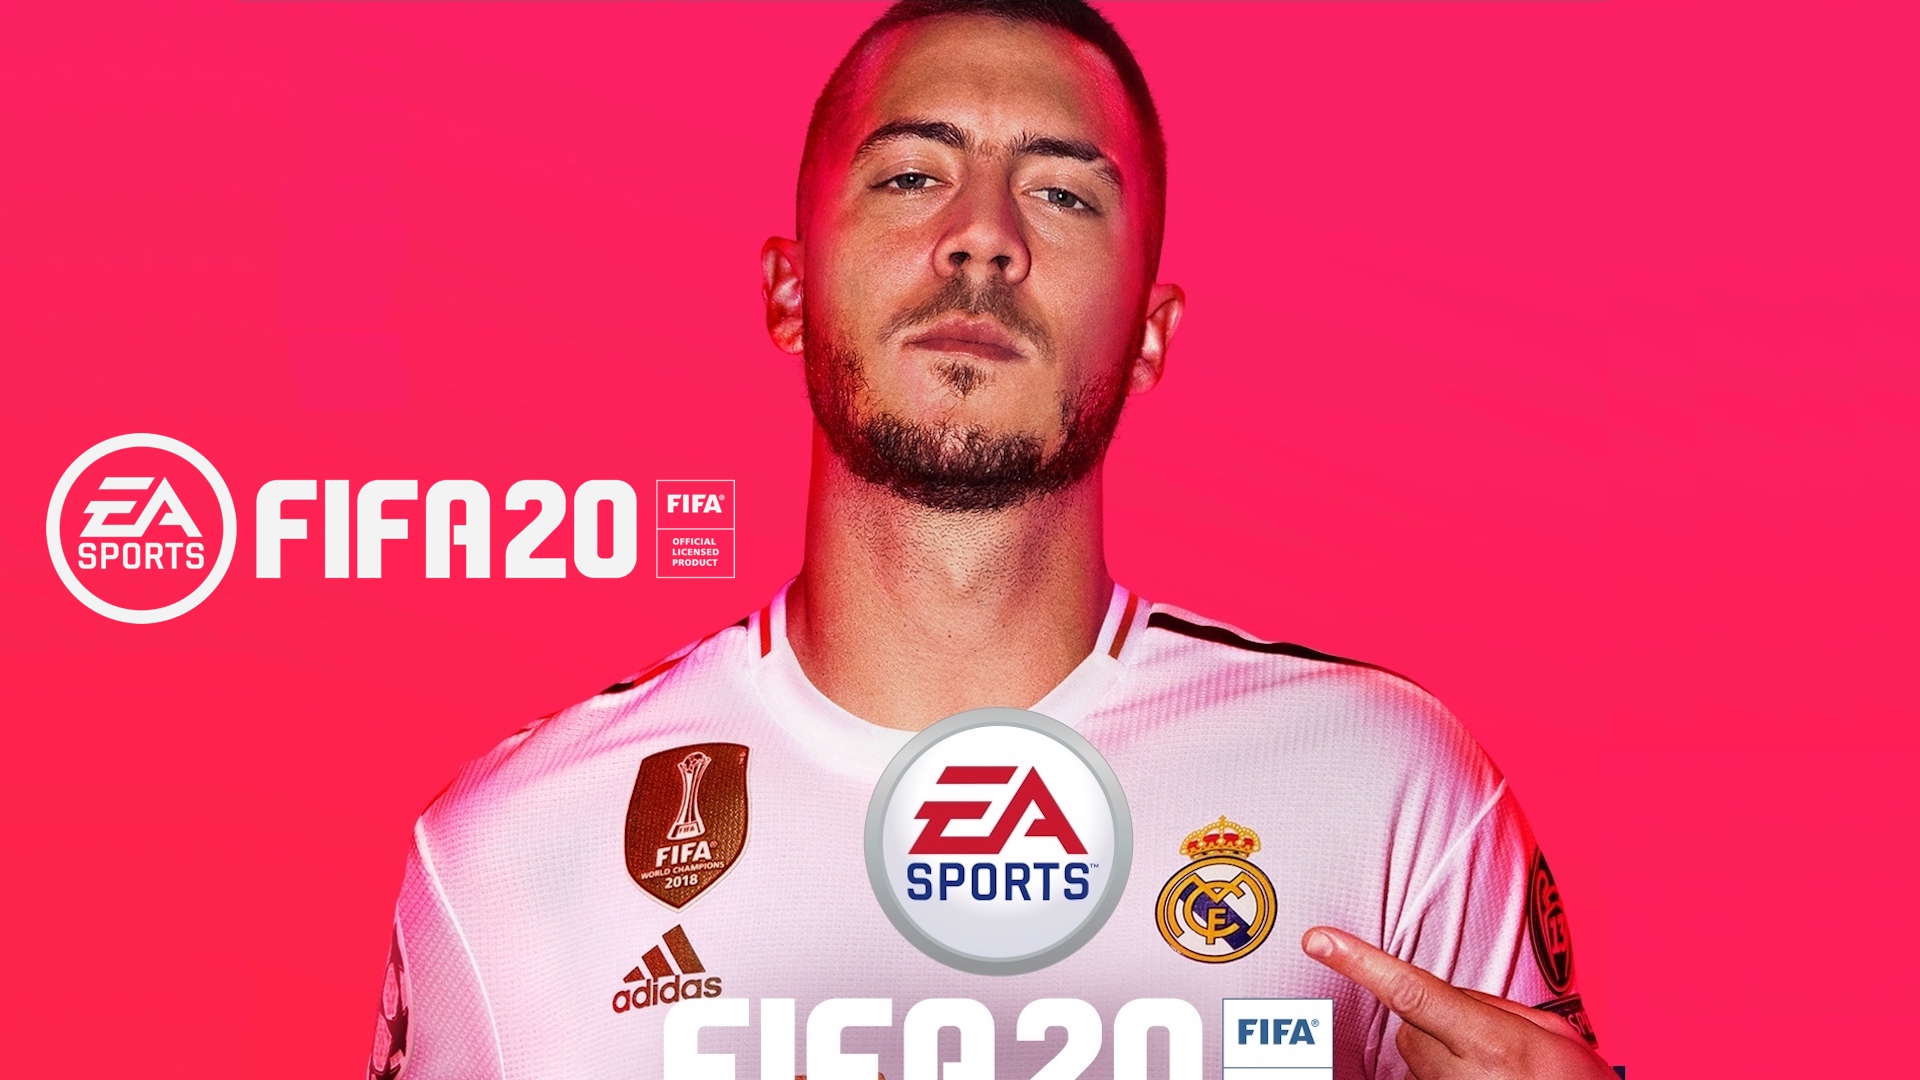 FIFA 20 official